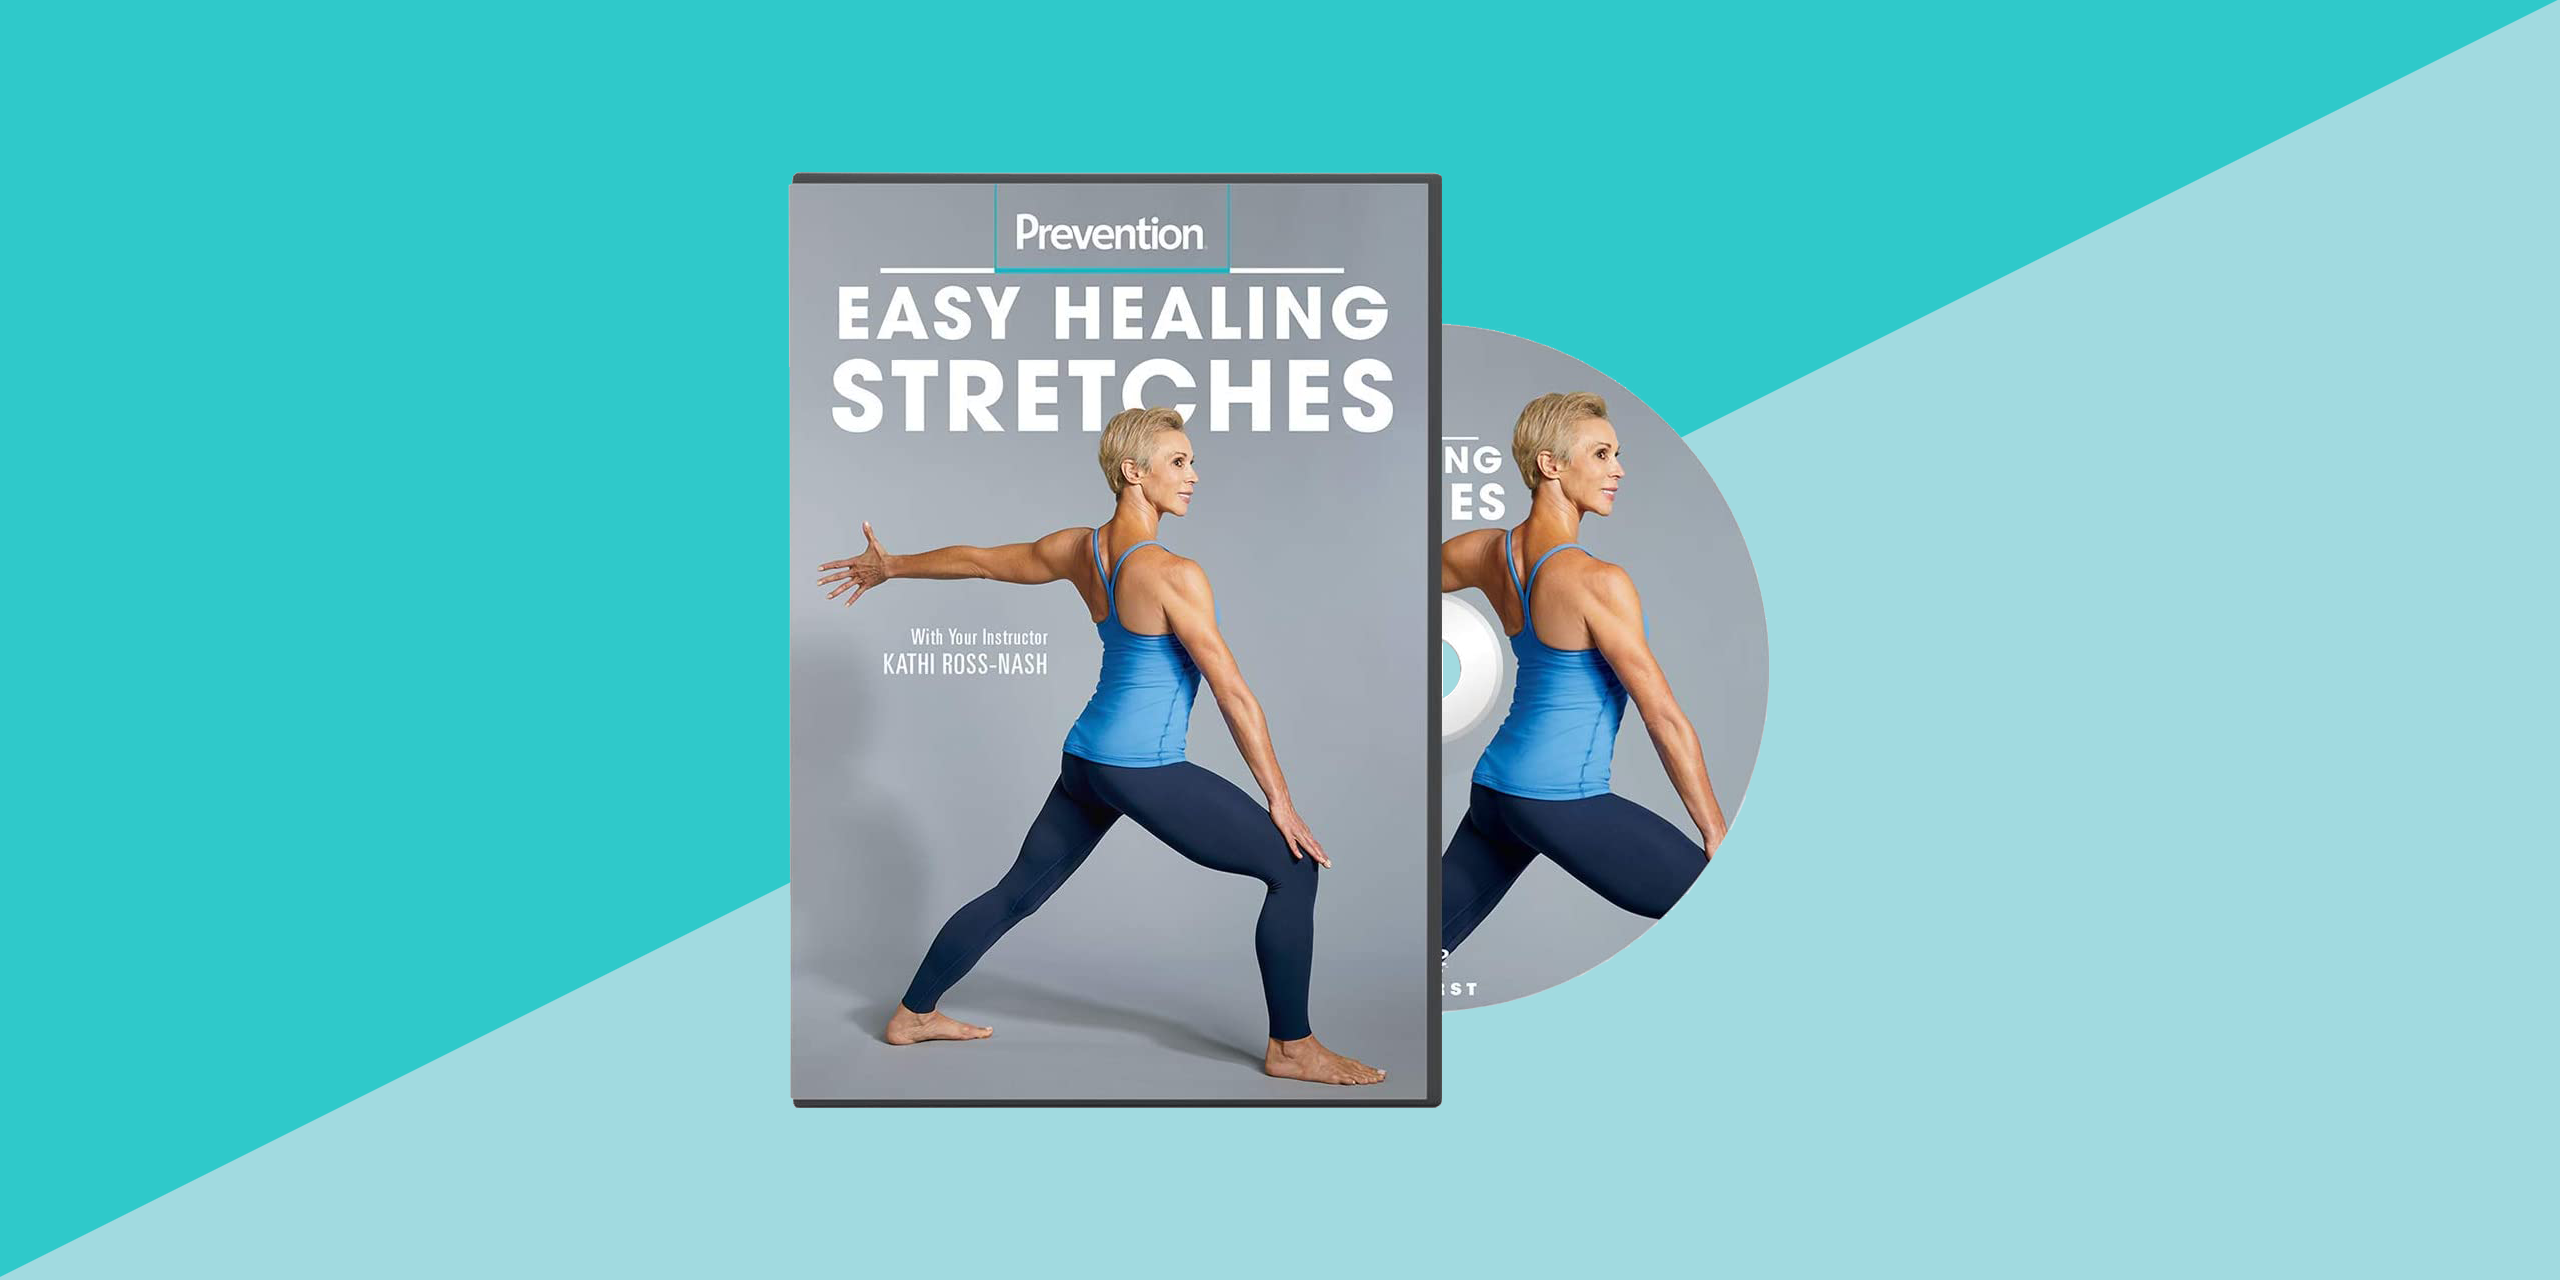 and More! Balancing - Perfect Yoga Program For Toning Prevention Best of Yoga DVD: Yoga Training At Home Improving Your Core Strength Relaxing Breathing Meditating 